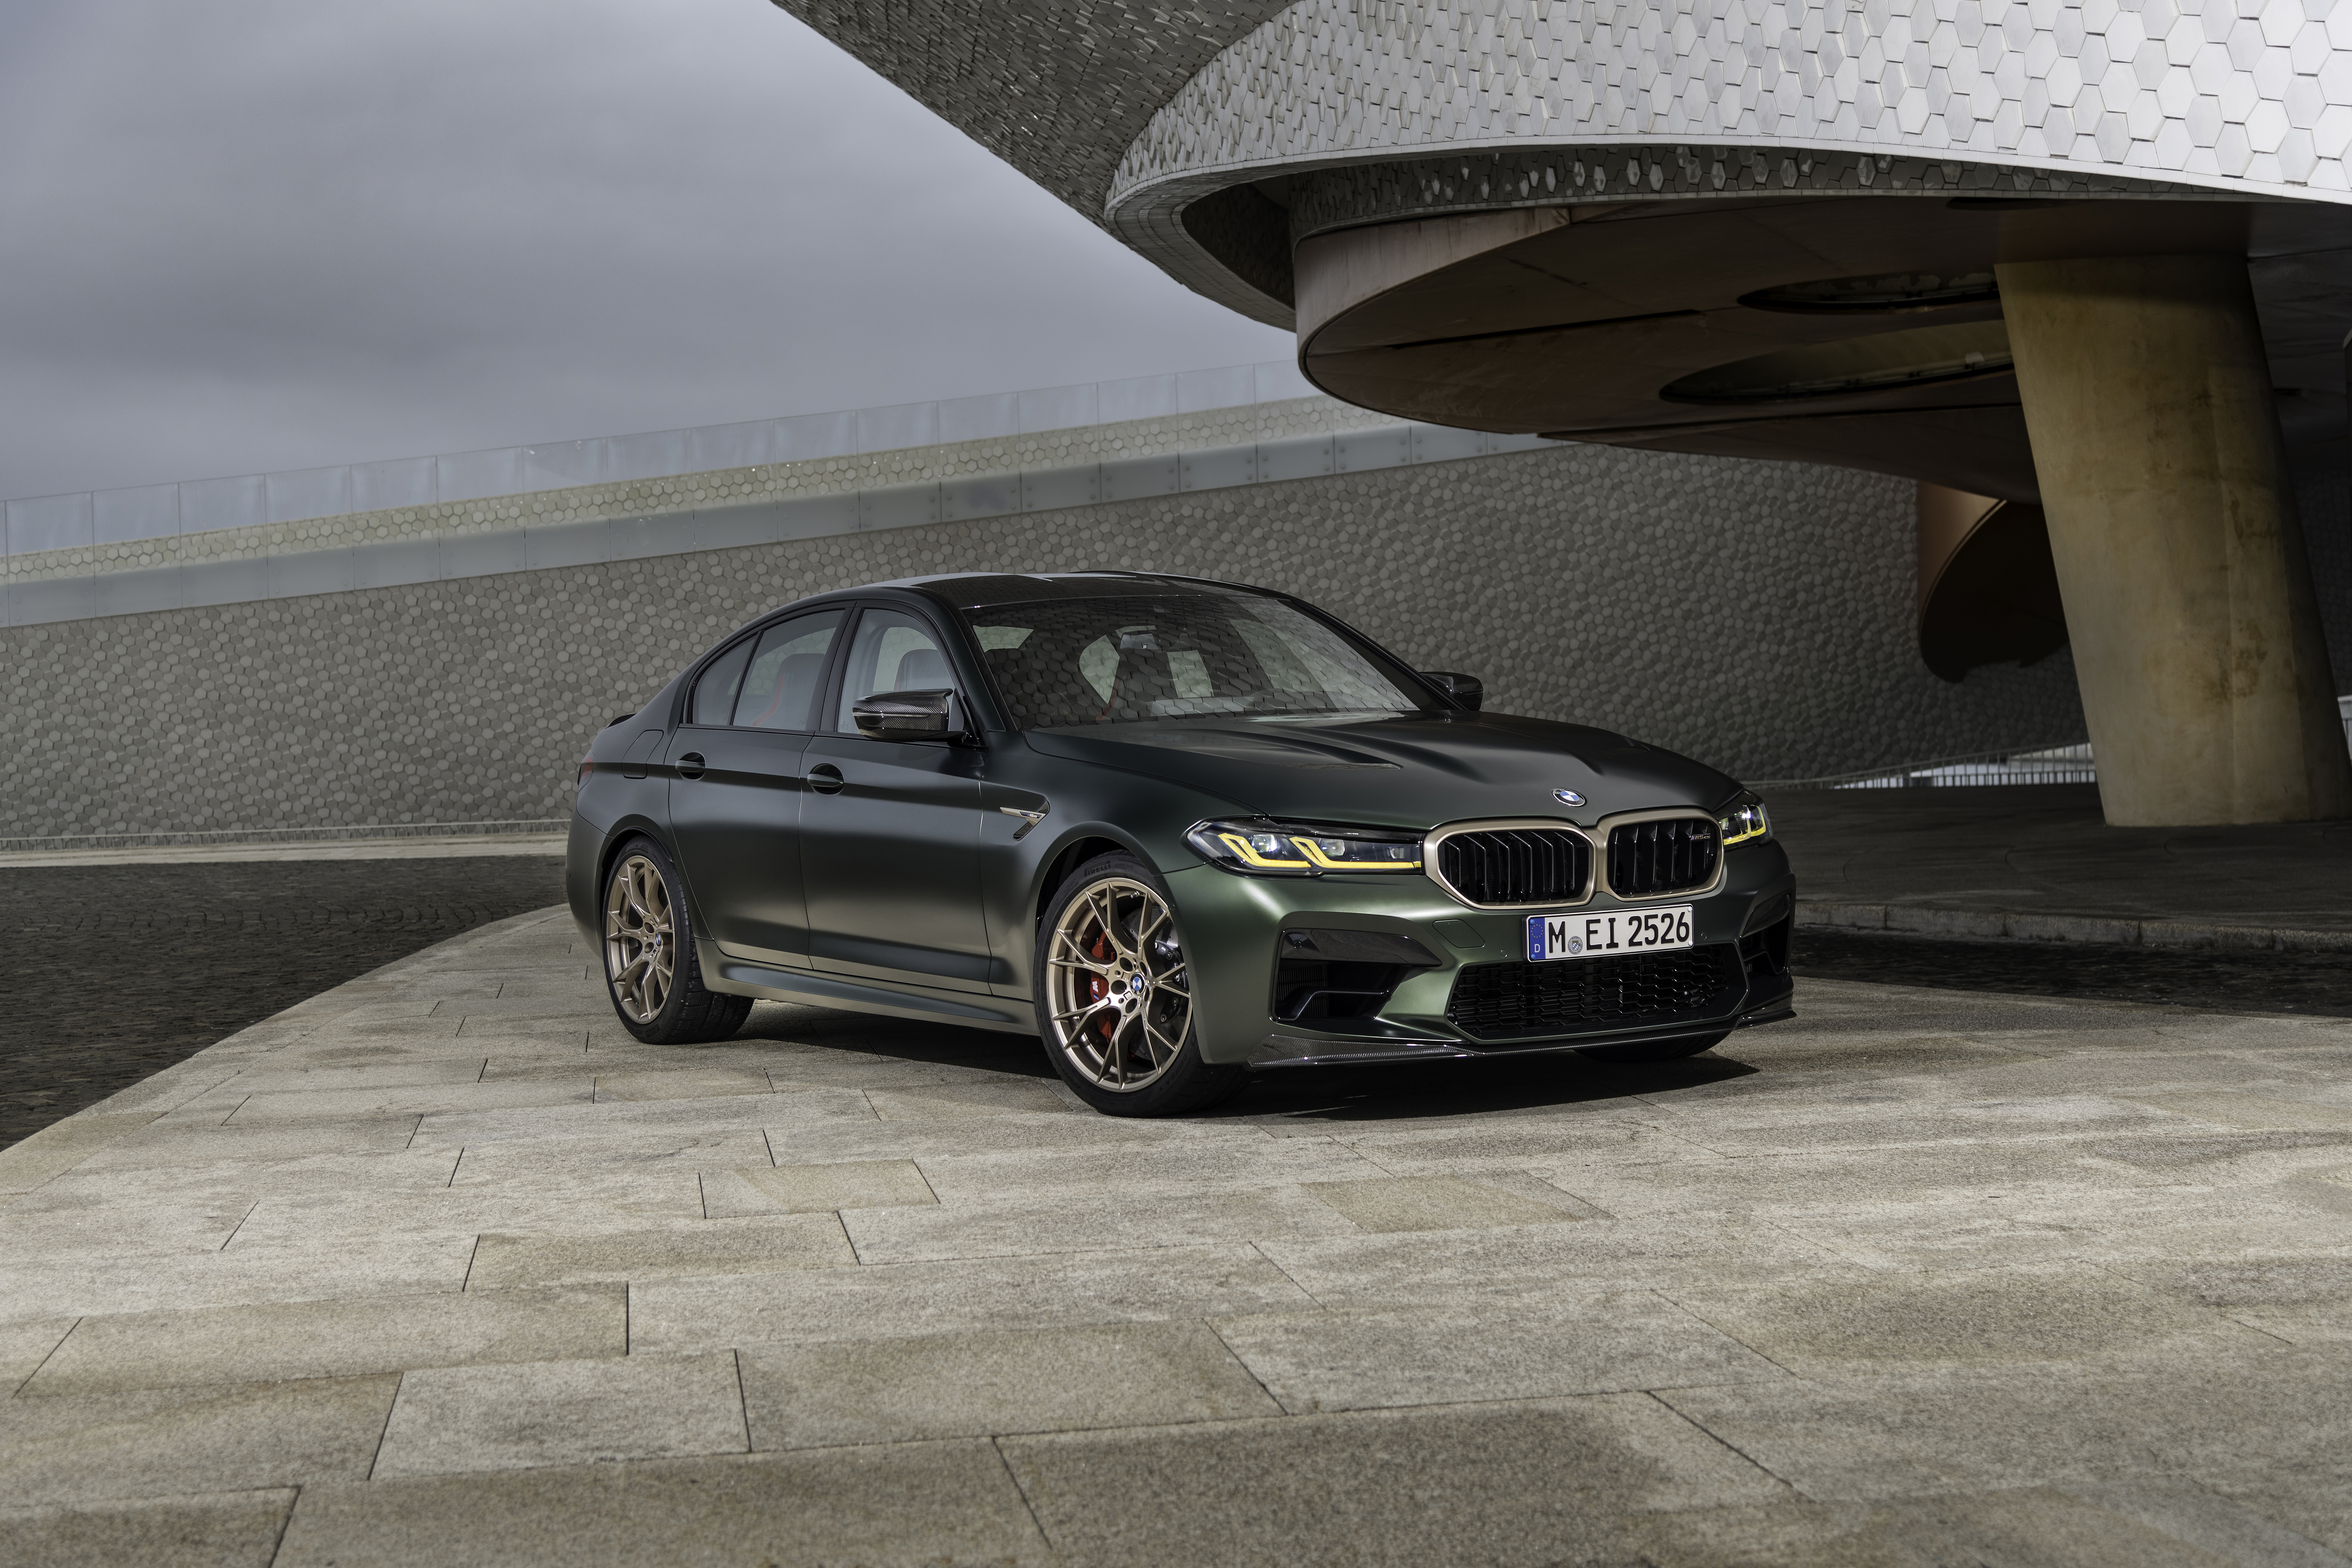 Бмв м5 цс. BMW m5 CS. BMW m5 CS 2021. BMW m5 CS 2022. BMW m5 Competition 2022.